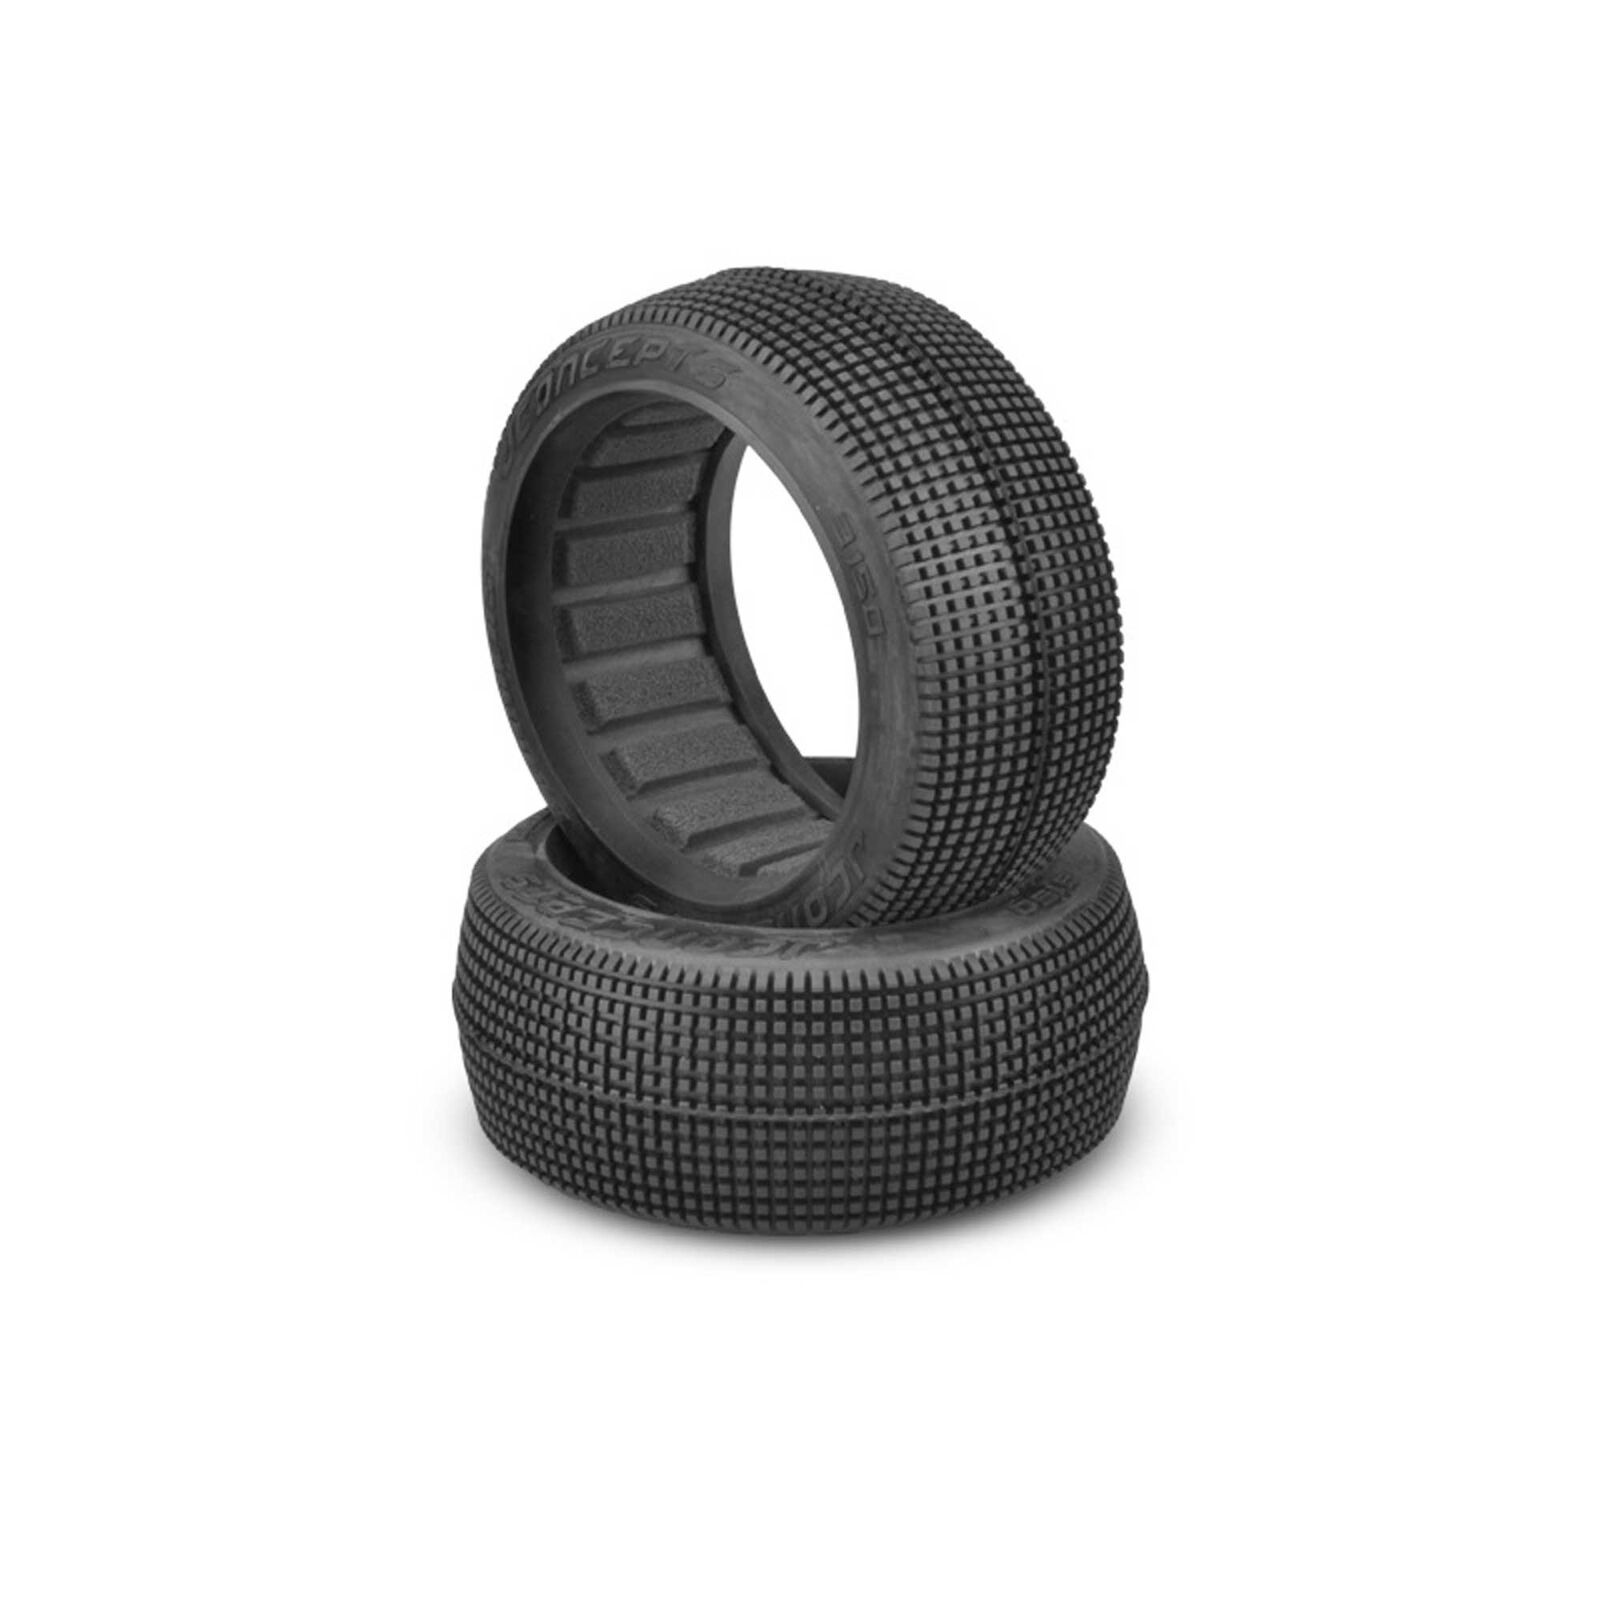 1/8 Blockers 83mm Buggy Tires and Inserts, Aqua A2 Compound (2)